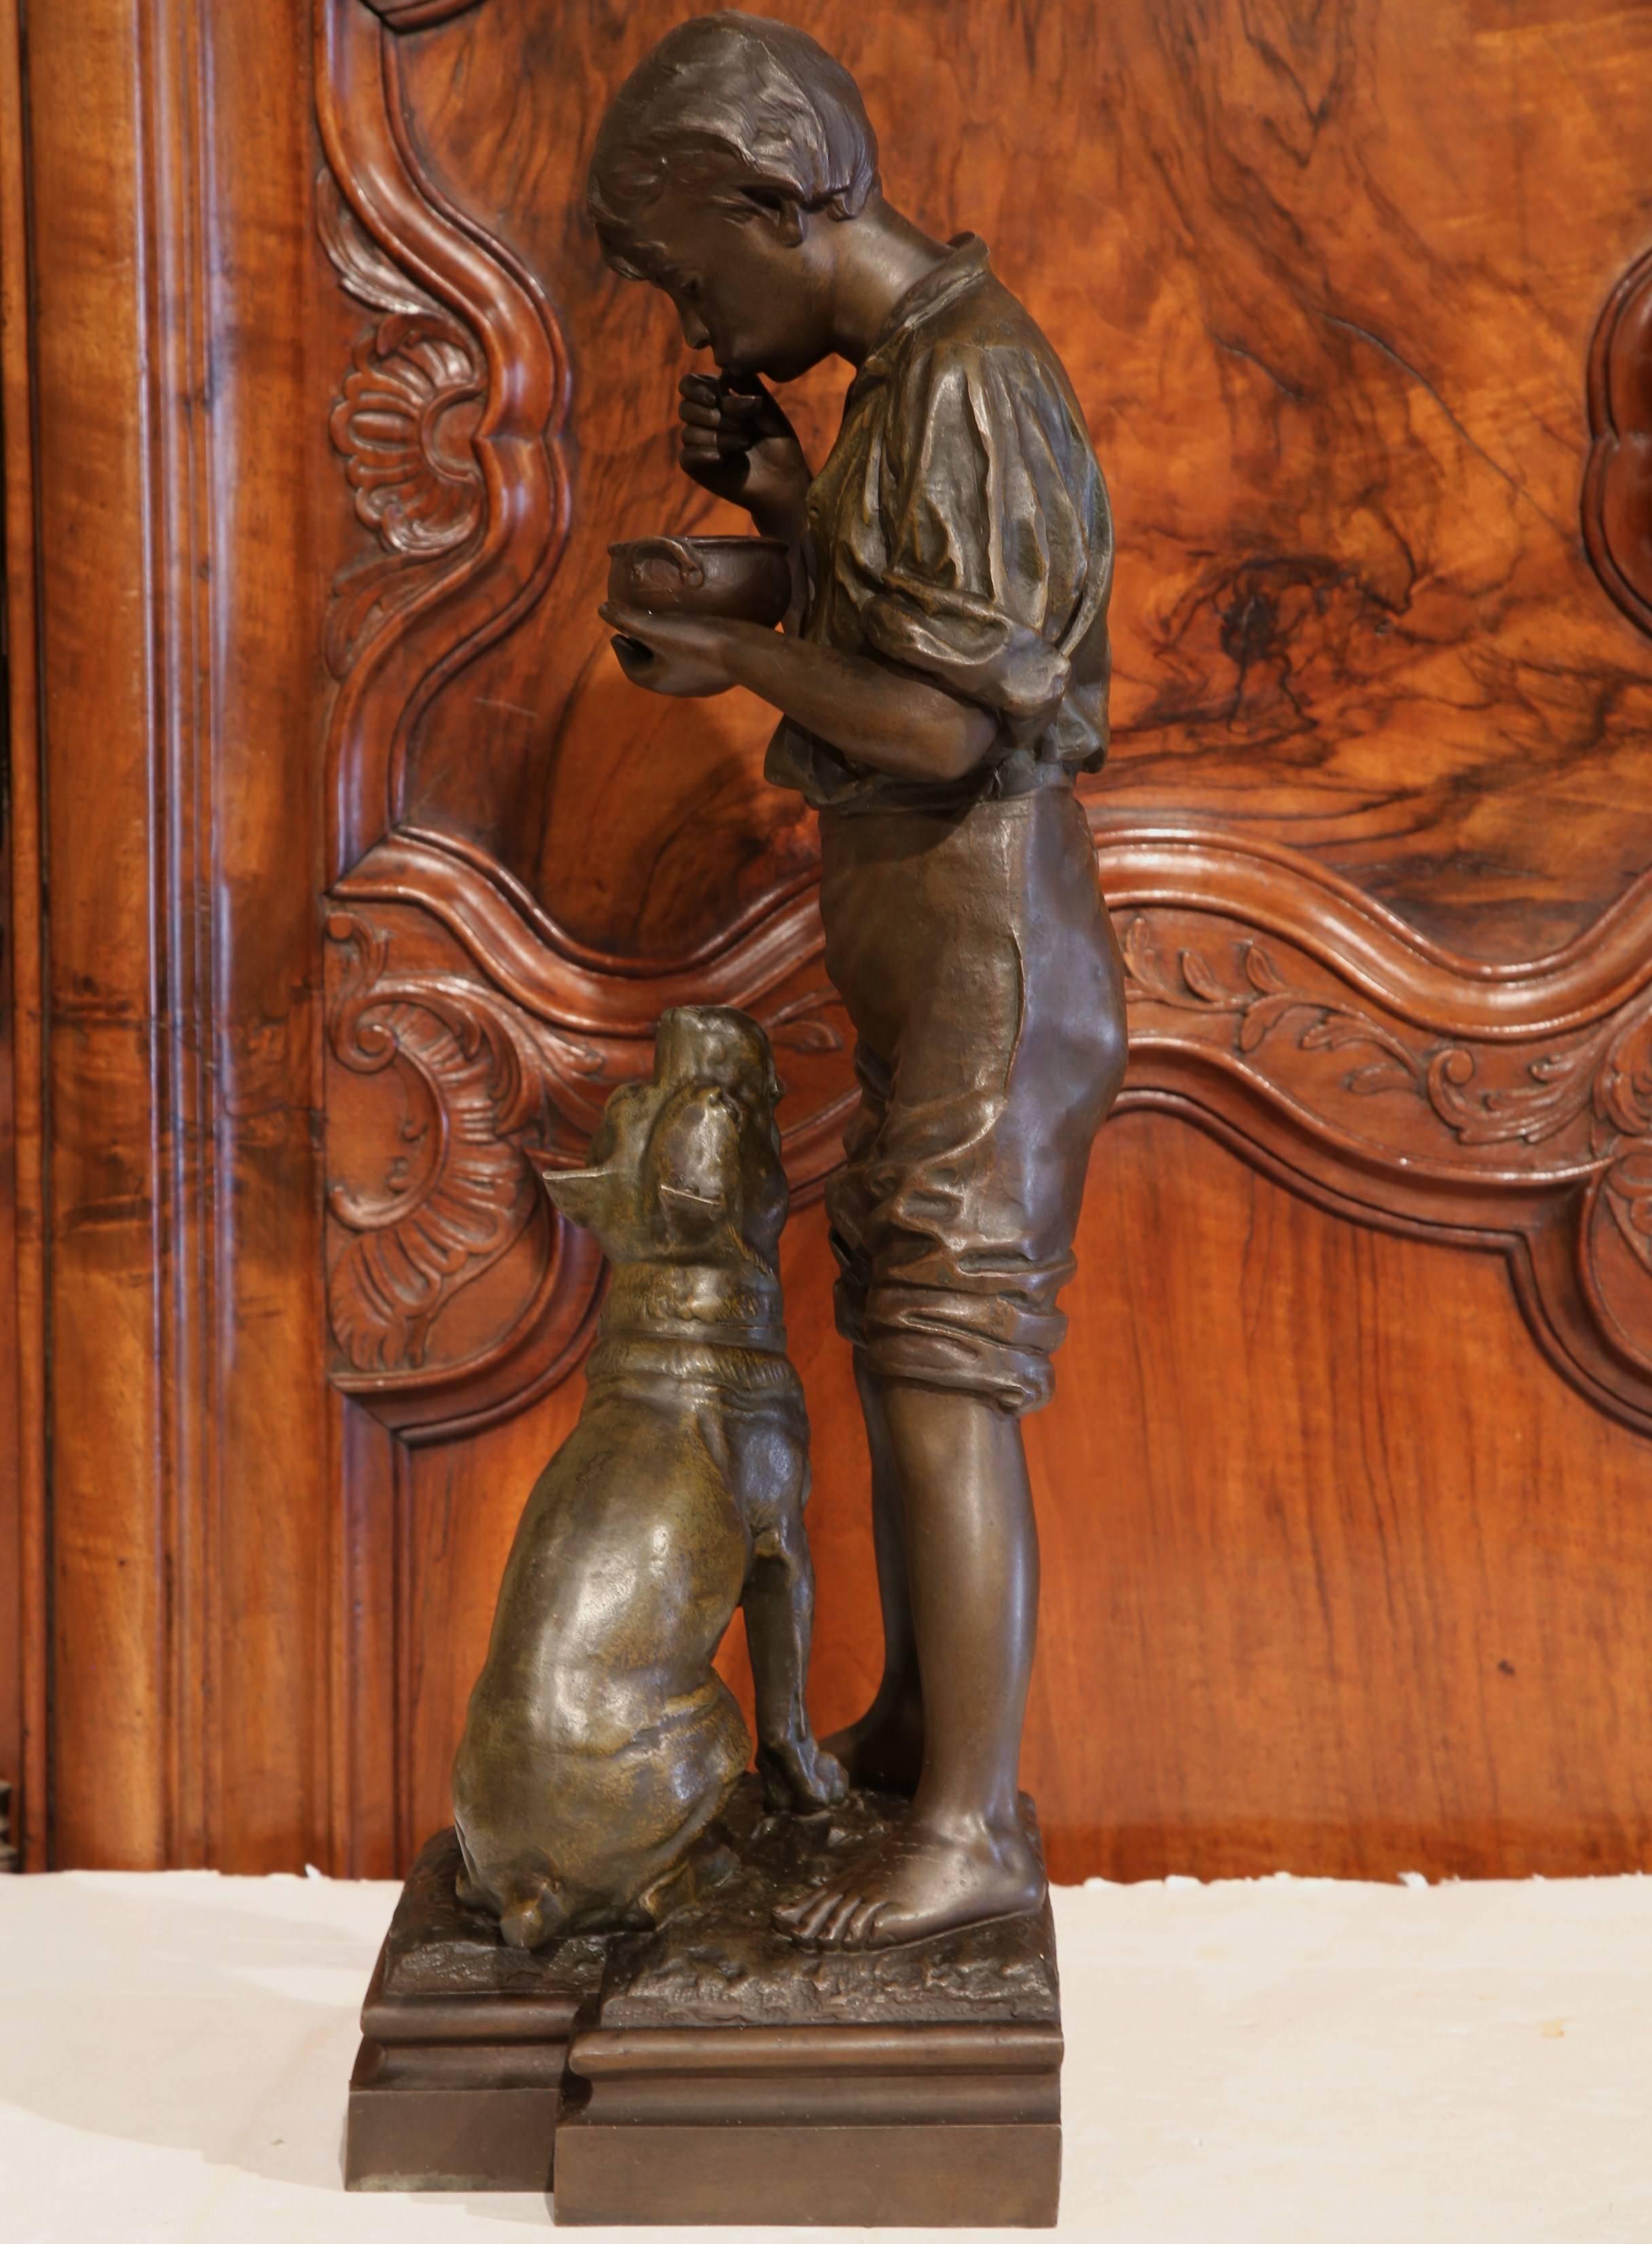 Patinated Early 20th Century Belgium Spelter Boy and Dog Sculpture Signed V. Rousseau 1932